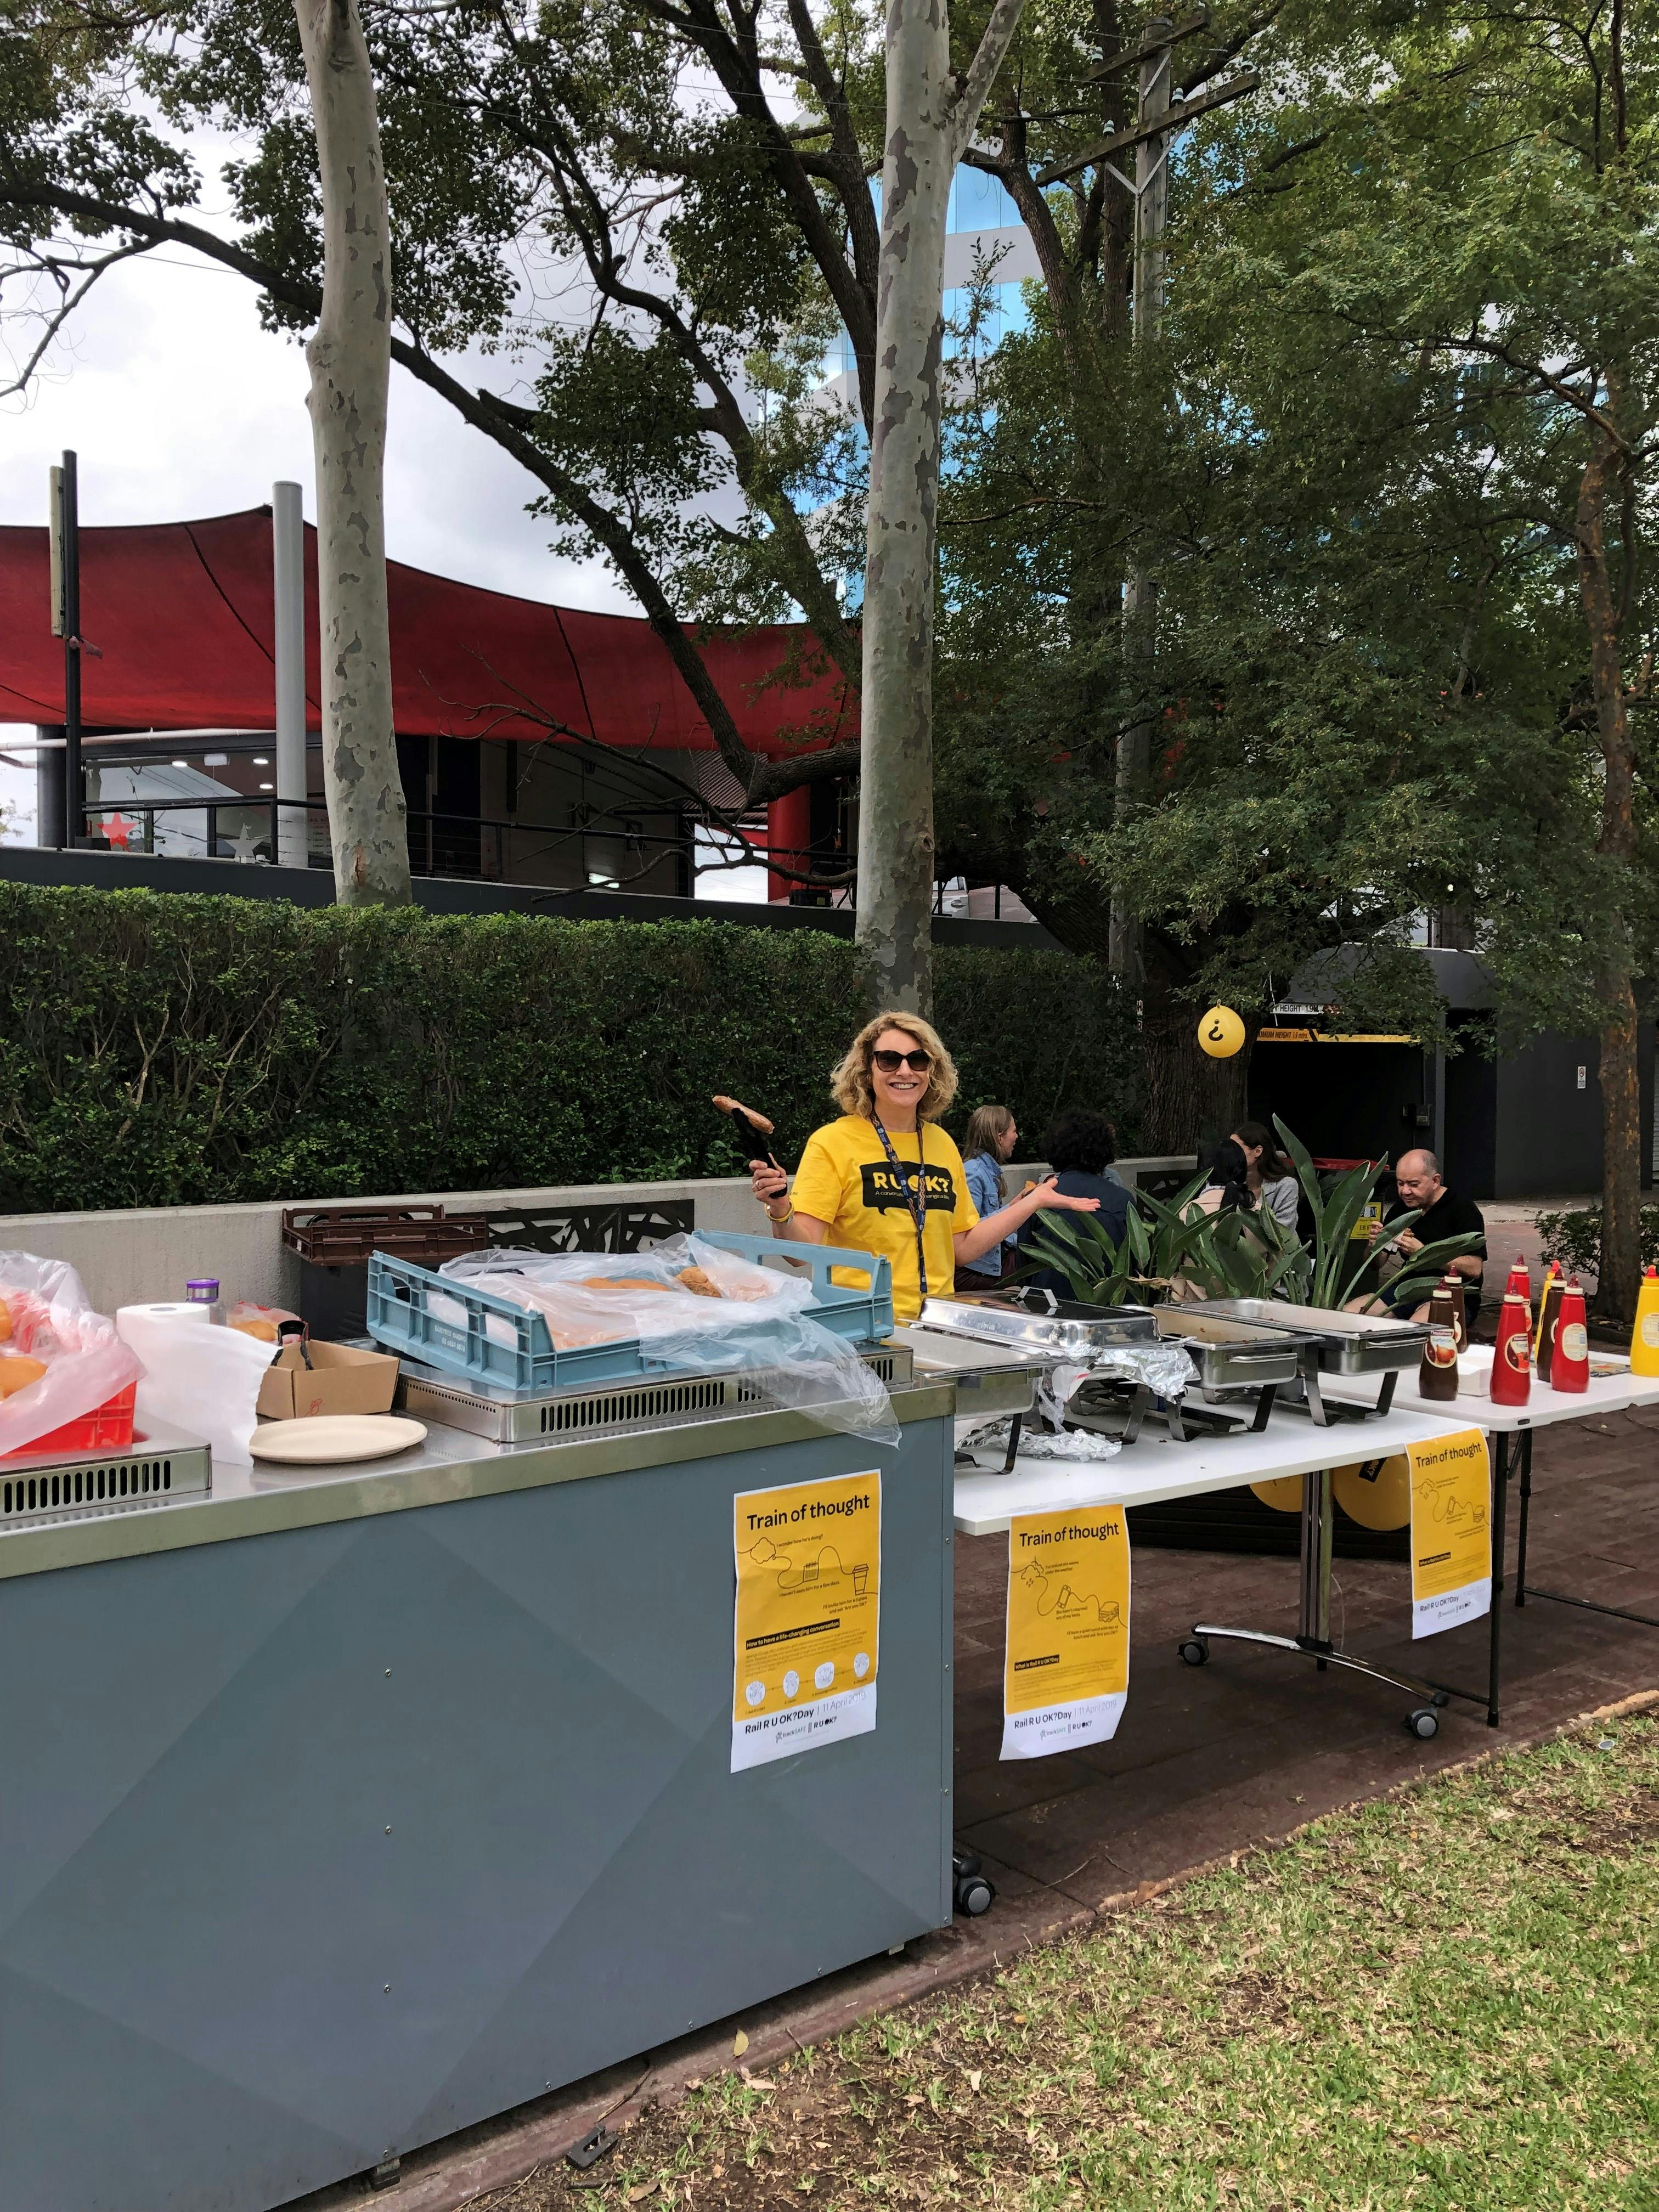 Barbeque at Chatswood event